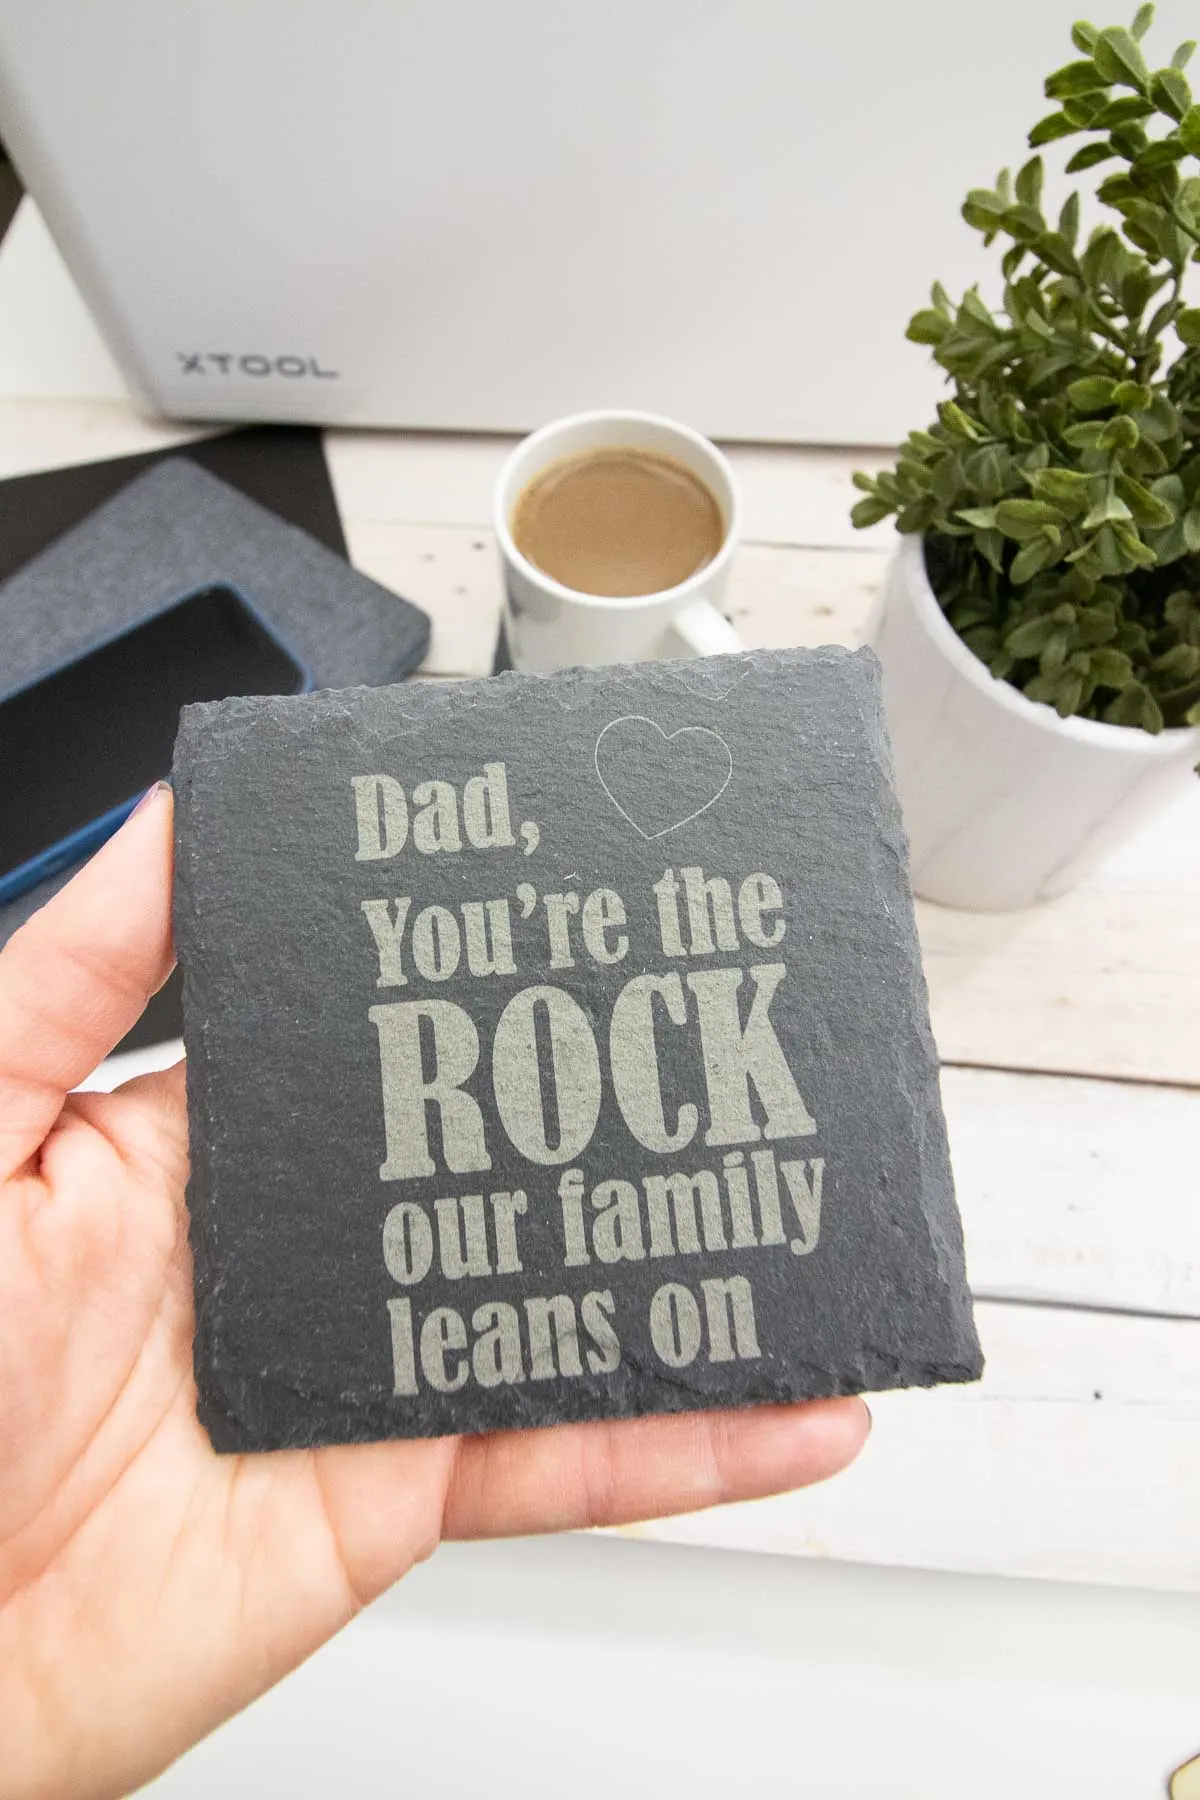 Hand holding an engraved slate coaster as an example of a Father's Day gift idea.